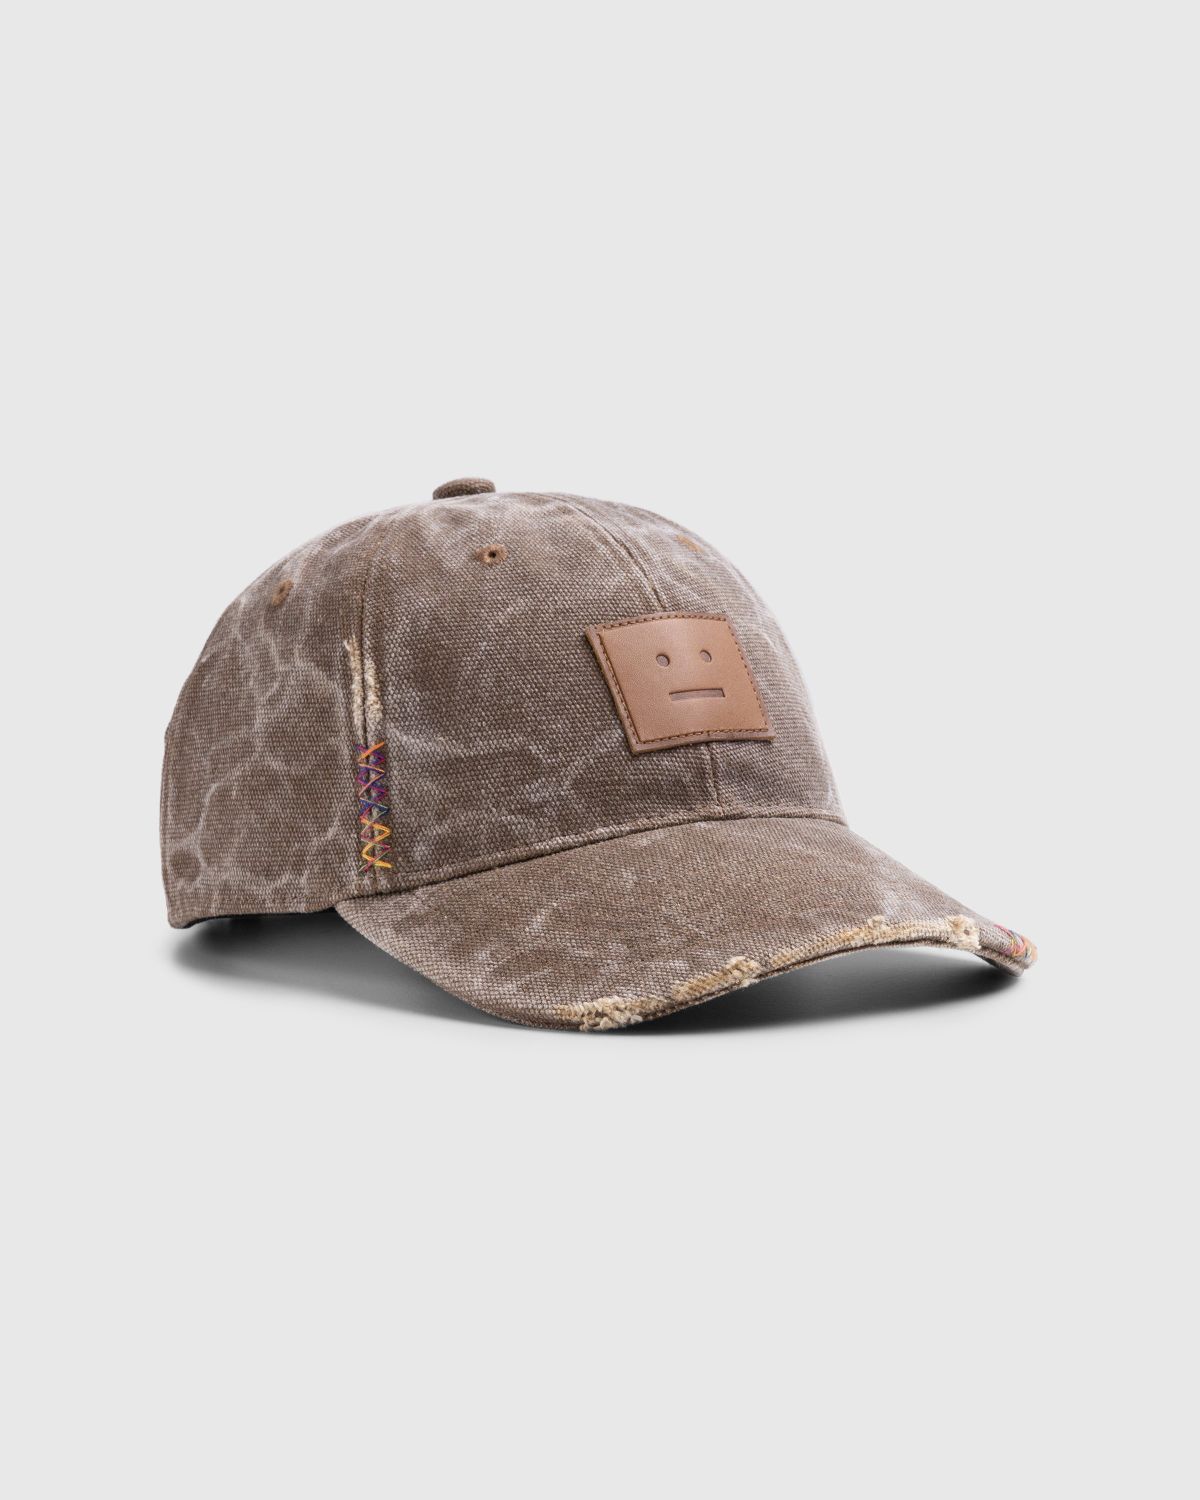 Acne Studios – Leather Face Patch Cap Toffee Brown | Highsnobiety Shop | Trucker Caps